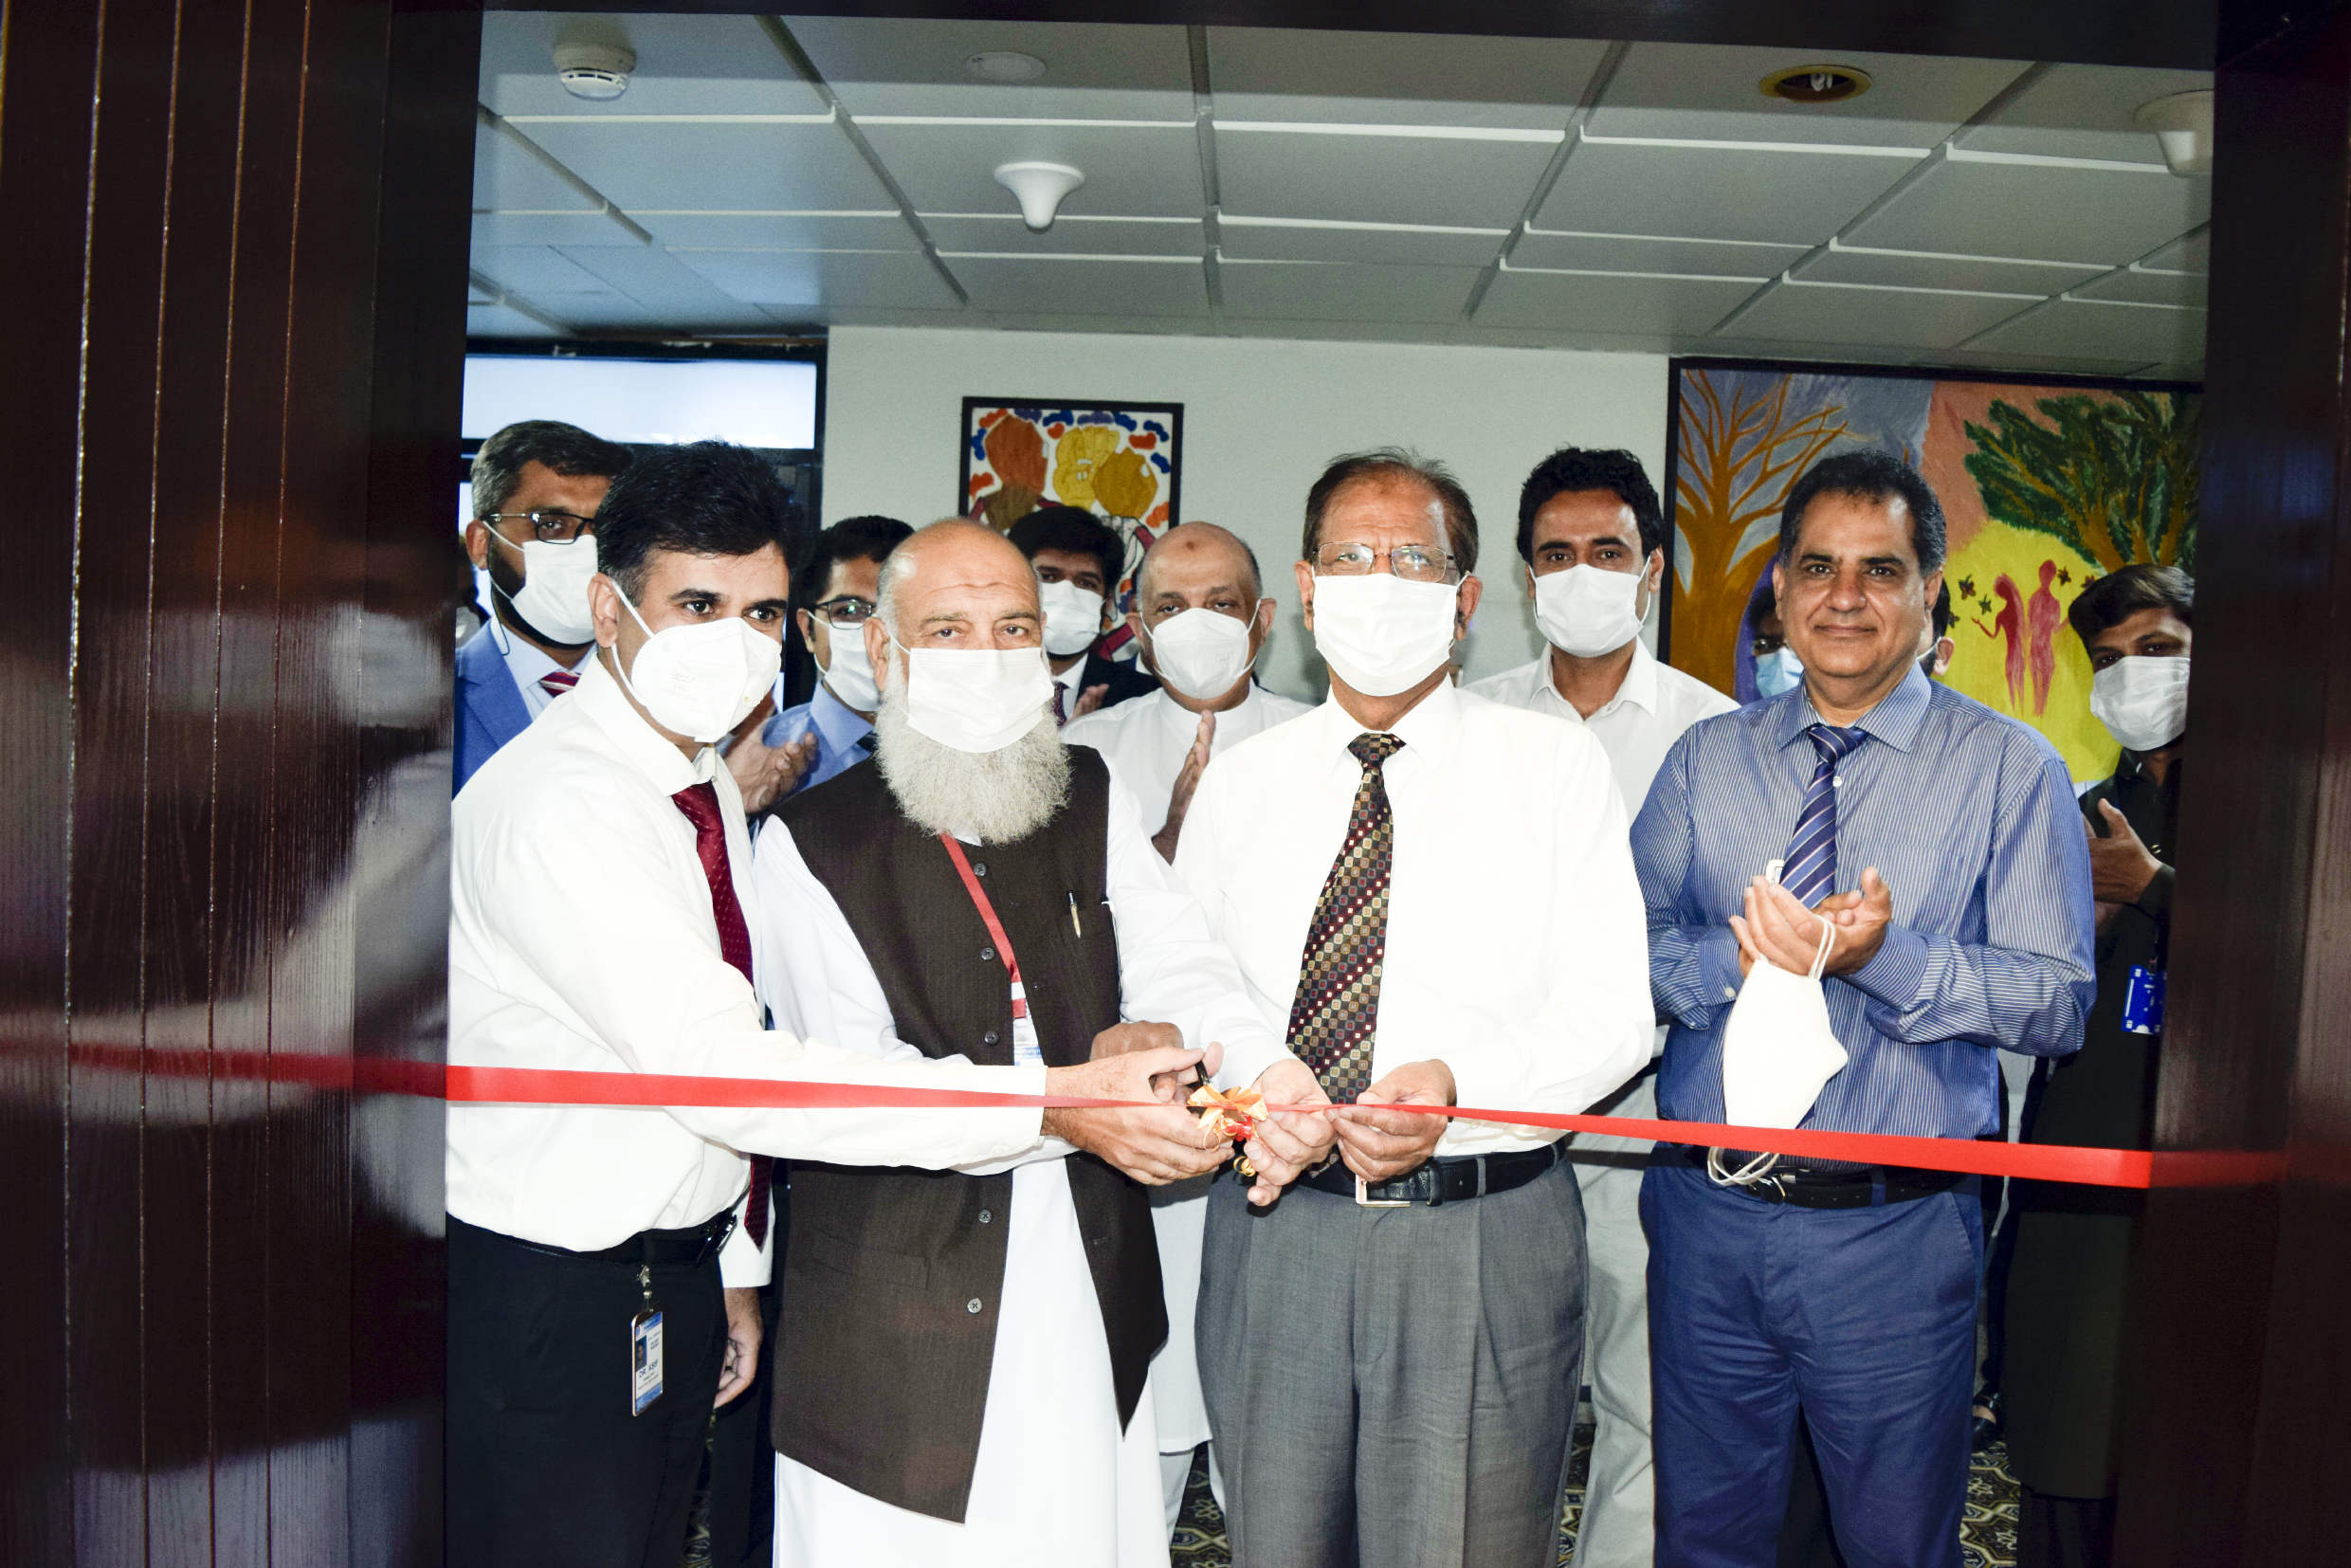 Shifa Inaugurates its 4D CT Simulator Scanner for Cancer Treatment